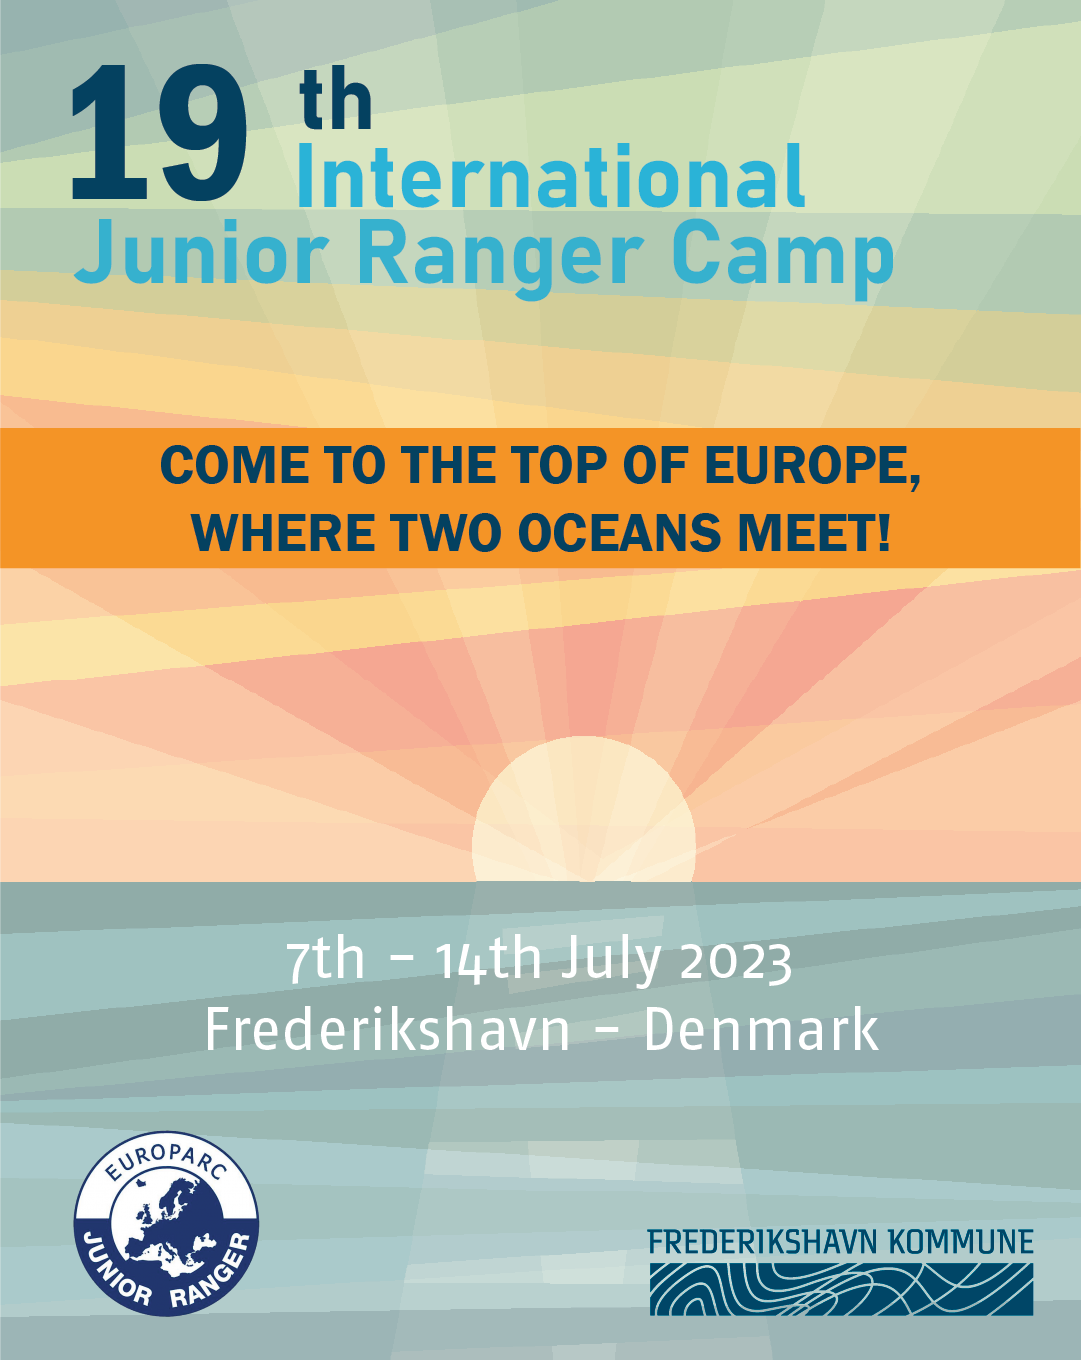 The poster with details for the International Junior Ranger Camp from the 7th to the 14th July 2023 in Frederikshavn in Denmark